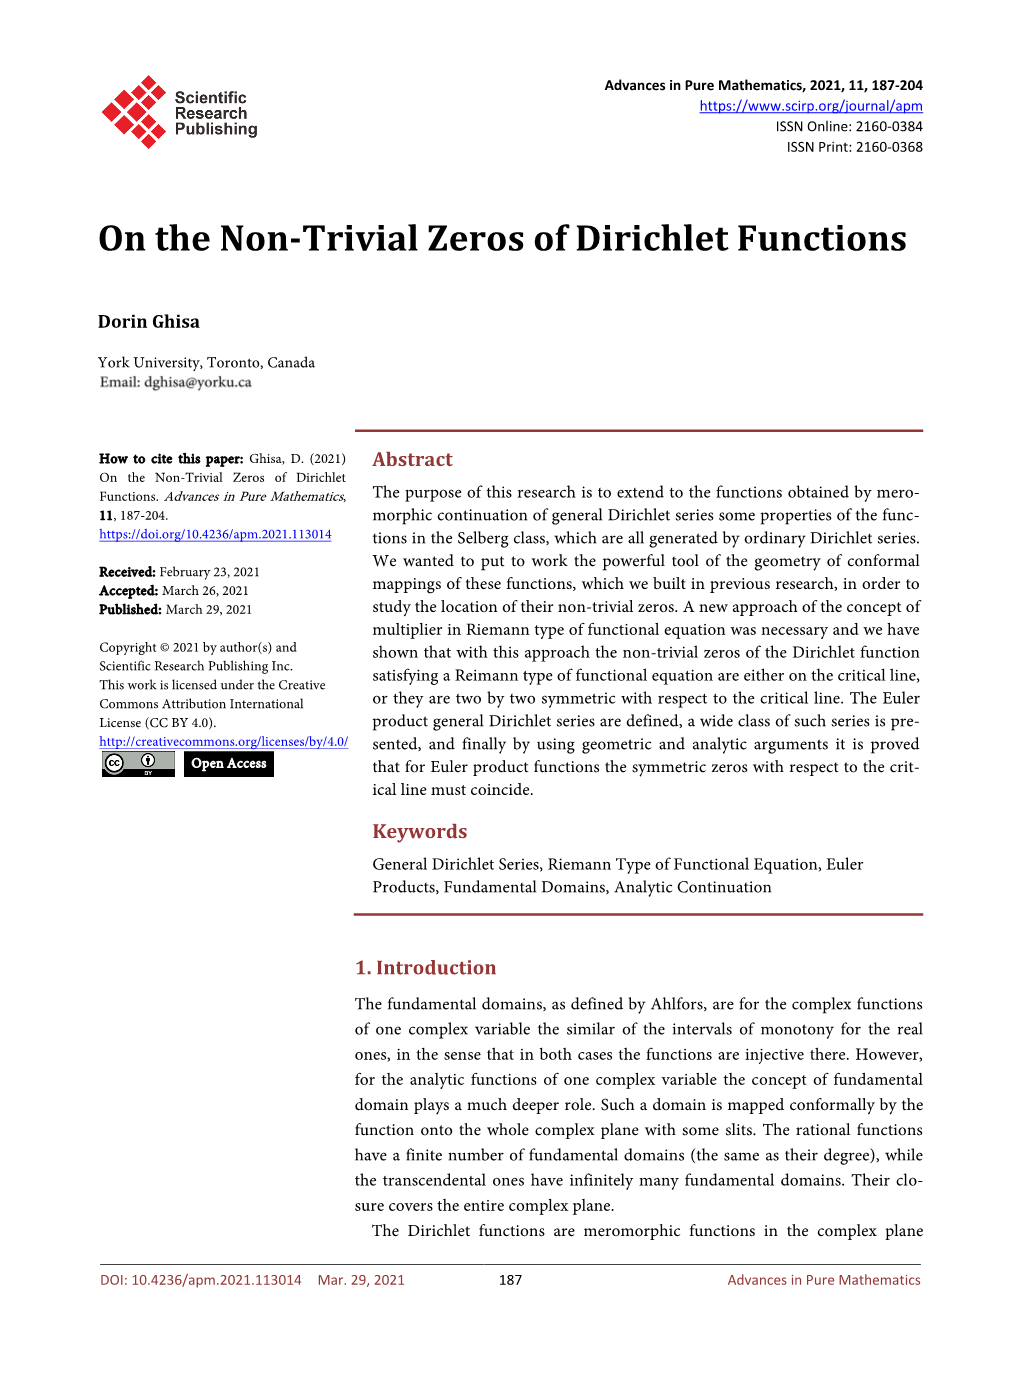 On the Non-Trivial Zeros of Dirichlet Functions